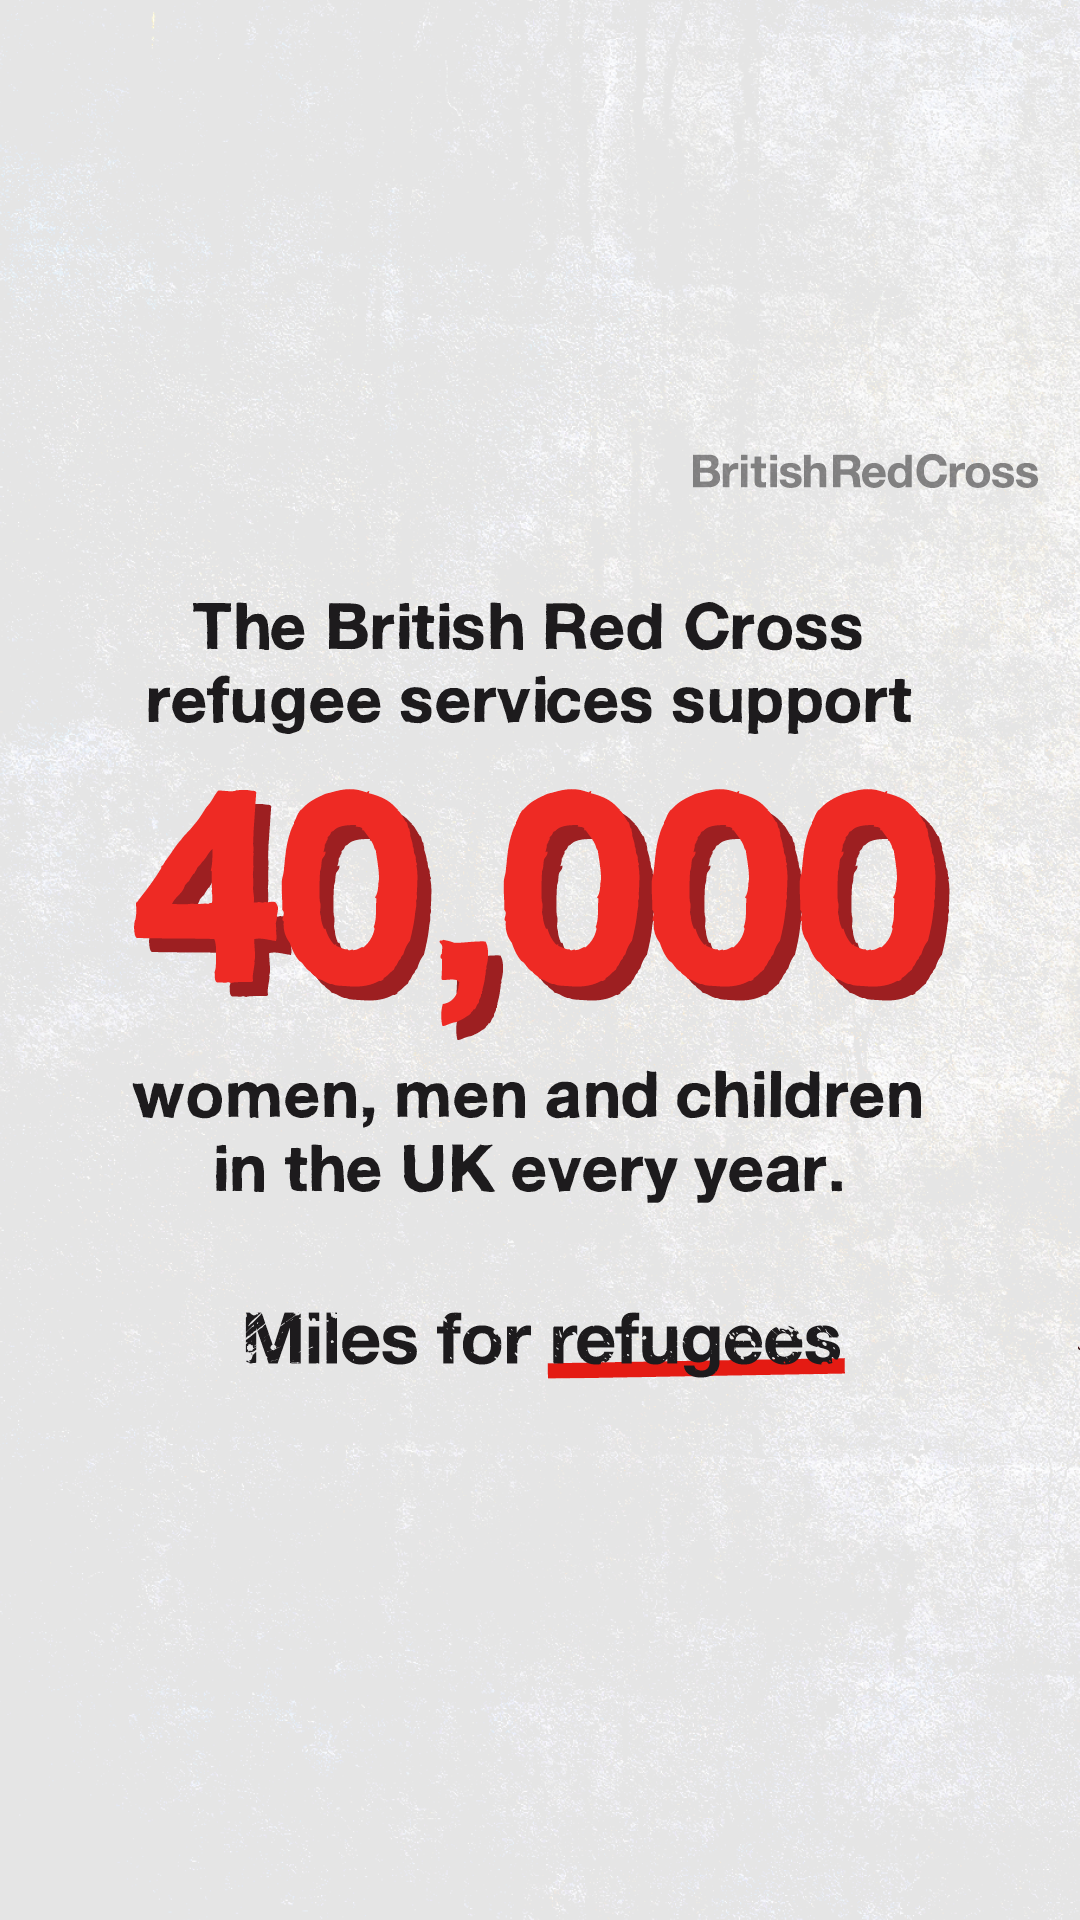 Text showing 40,000 people each year supported by British Red Cross UK services, shown on grey background